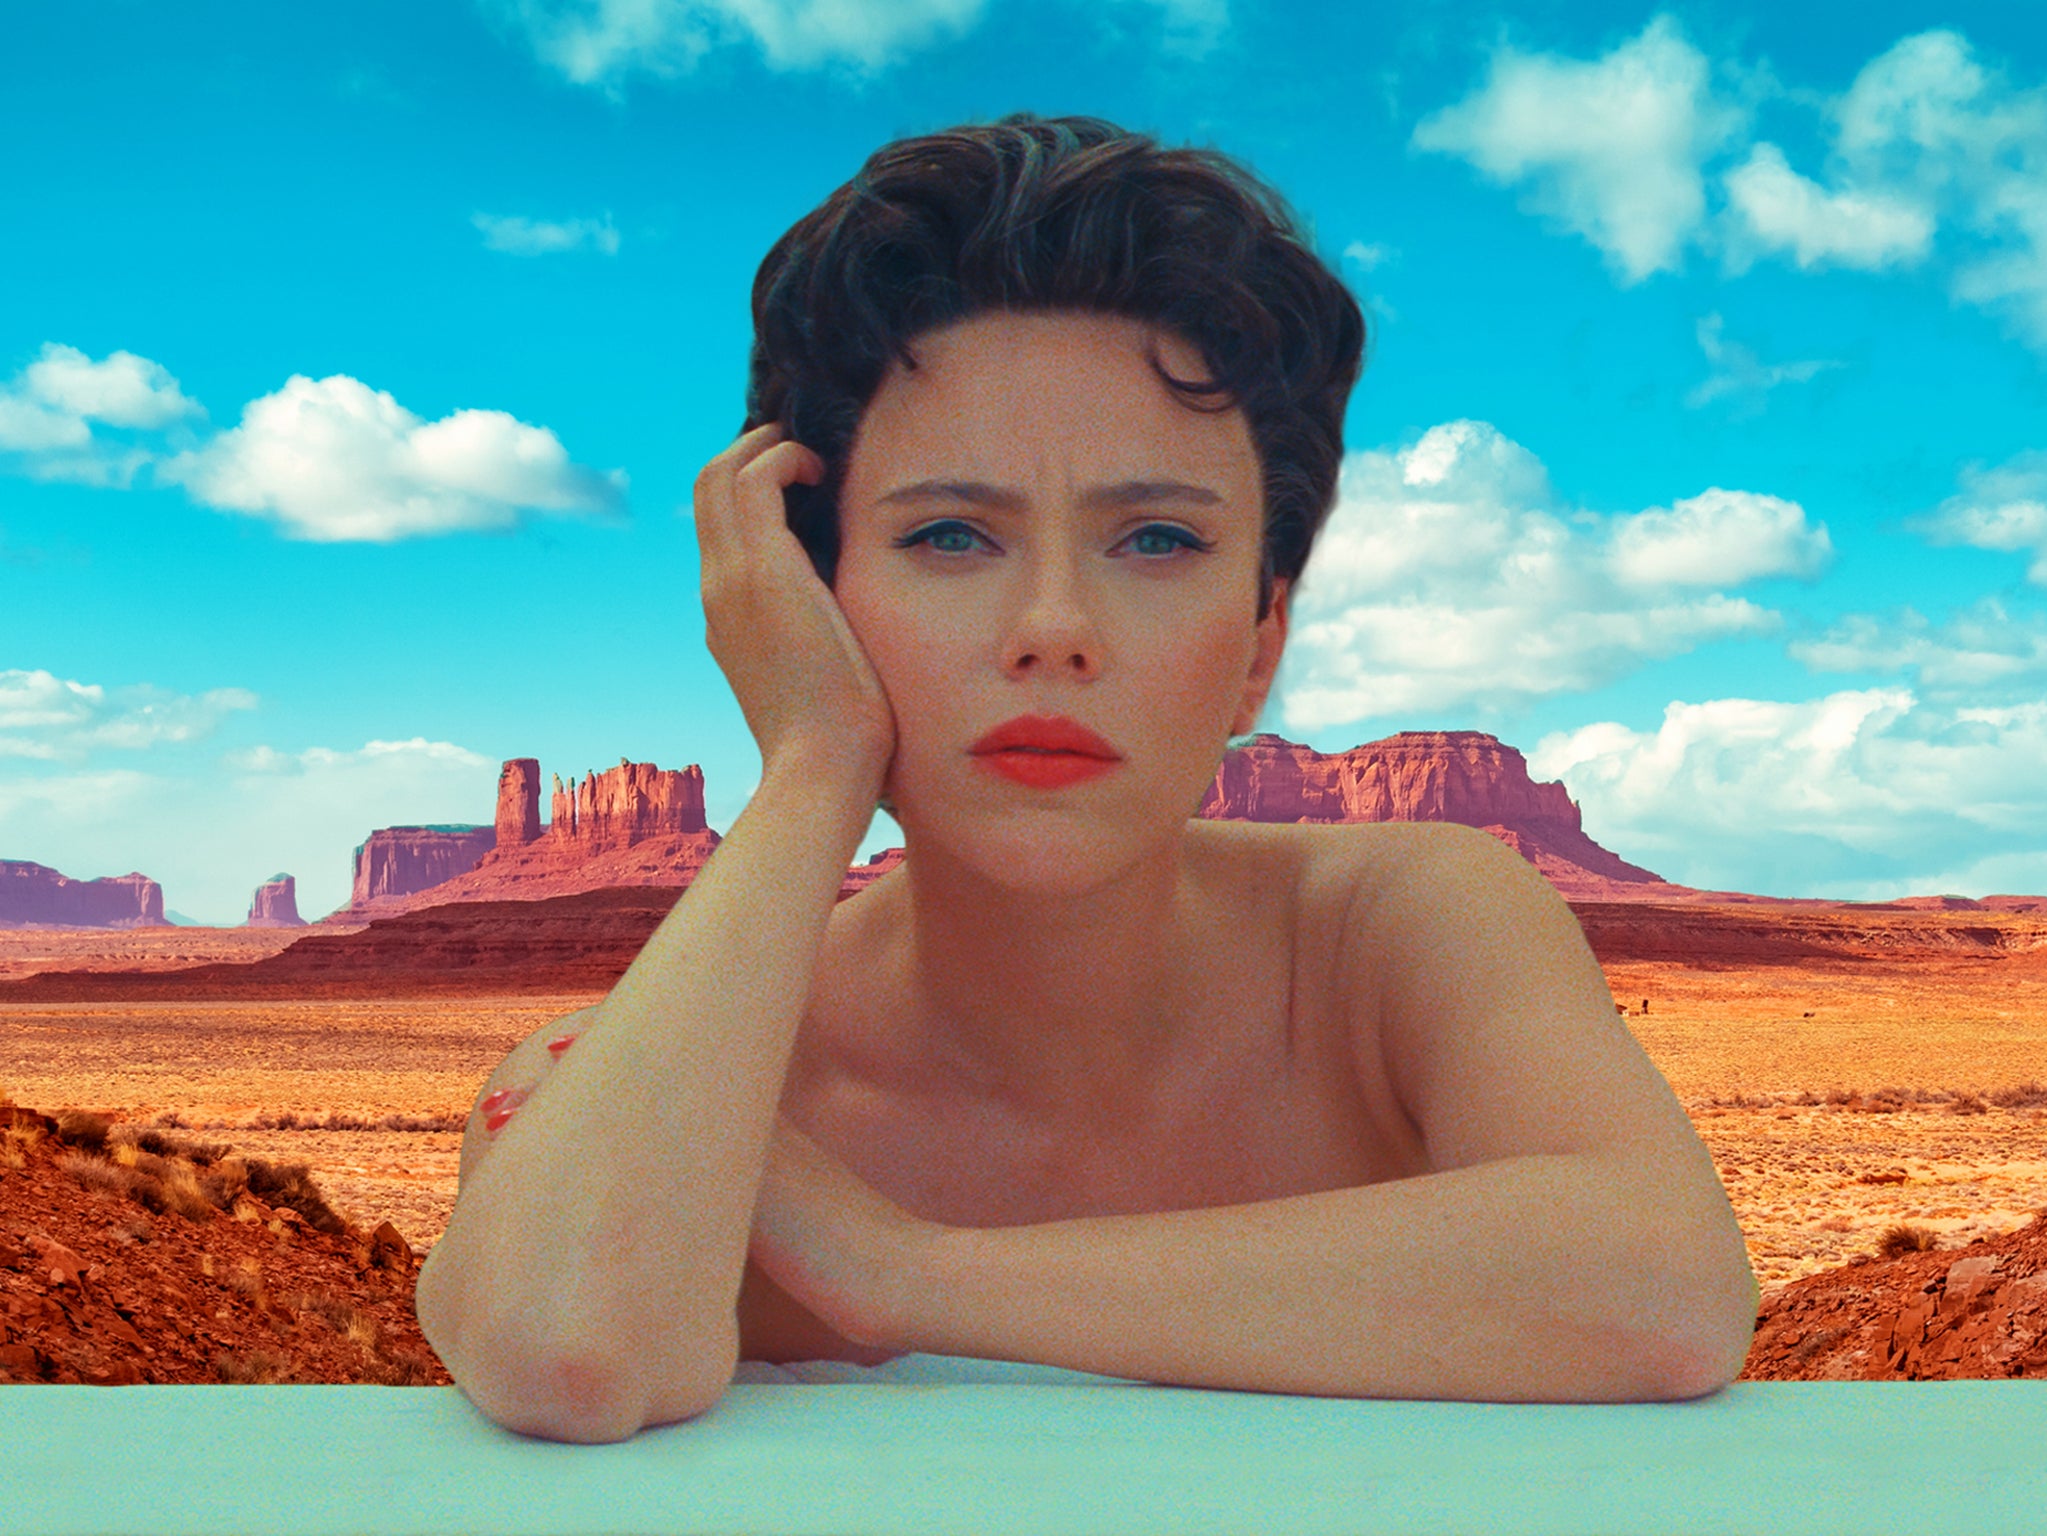 ‘It’s really about [an] existential angst’: Scarlett Johansson in Wes Anderson’s ‘Asteroid City’